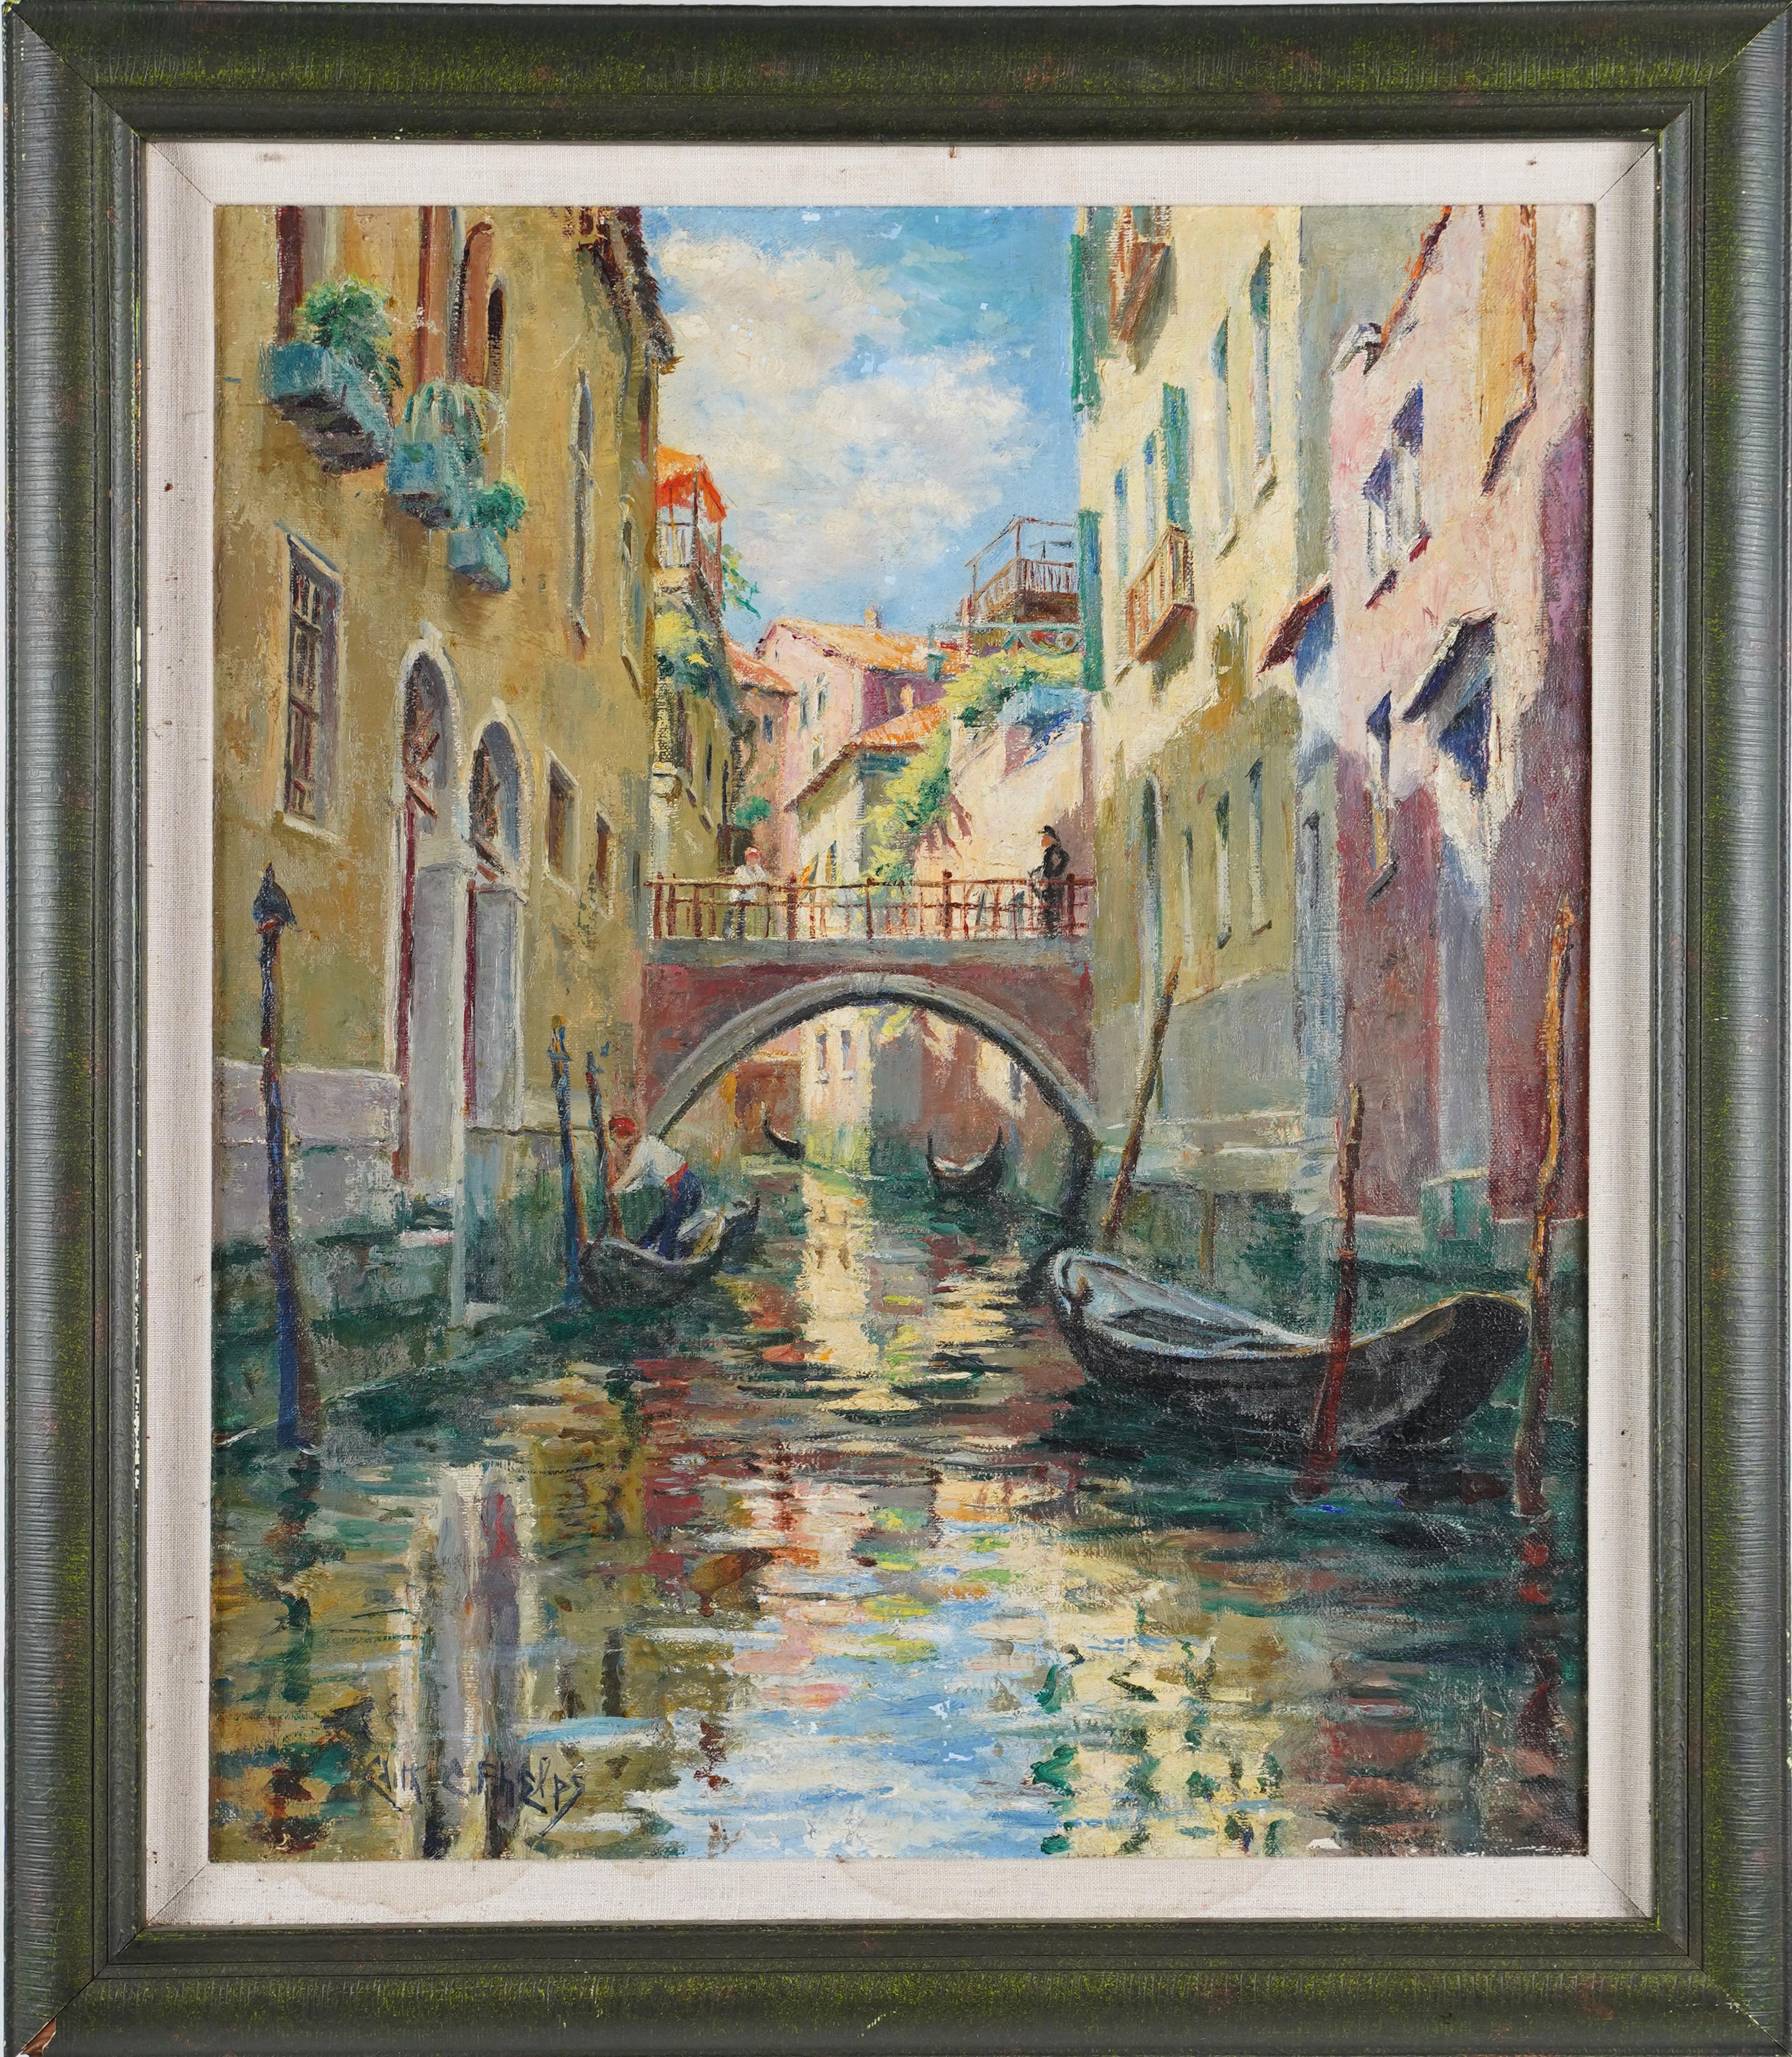 Edith Catlin (Stowe) Phelps Landscape Painting - Antique American Female Impressionist Venice Italy Signed Cityscape Oil Painting